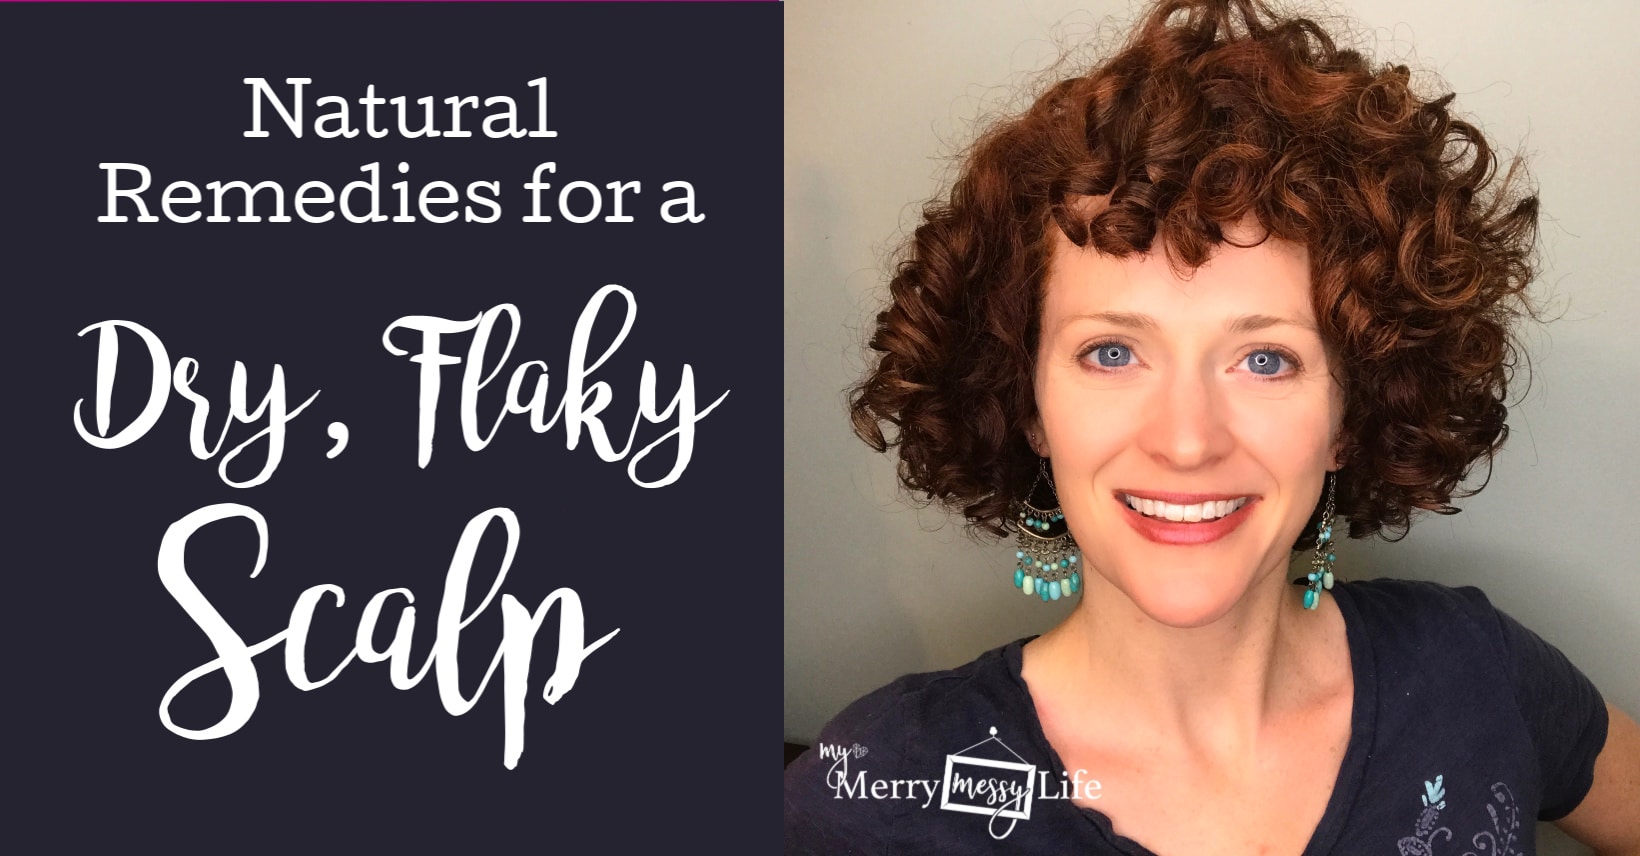 Natural Remedies for Dry, Flaky Scalp – My Merry Messy Life